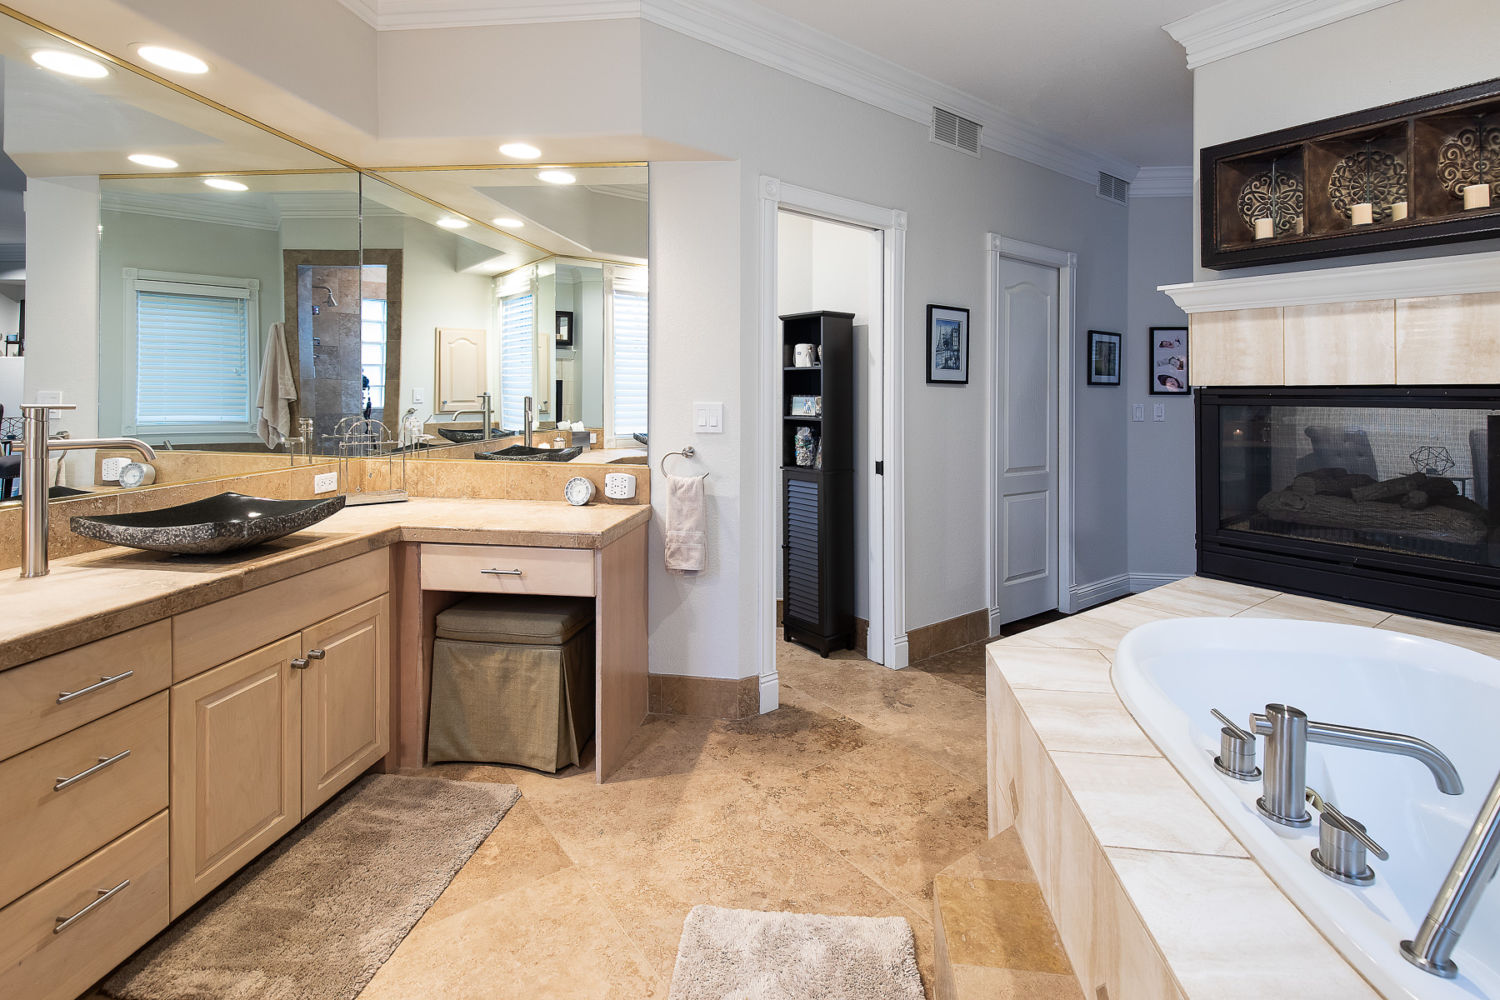 Master Bathroom Remodel: from Warm Beige to Cool Waves